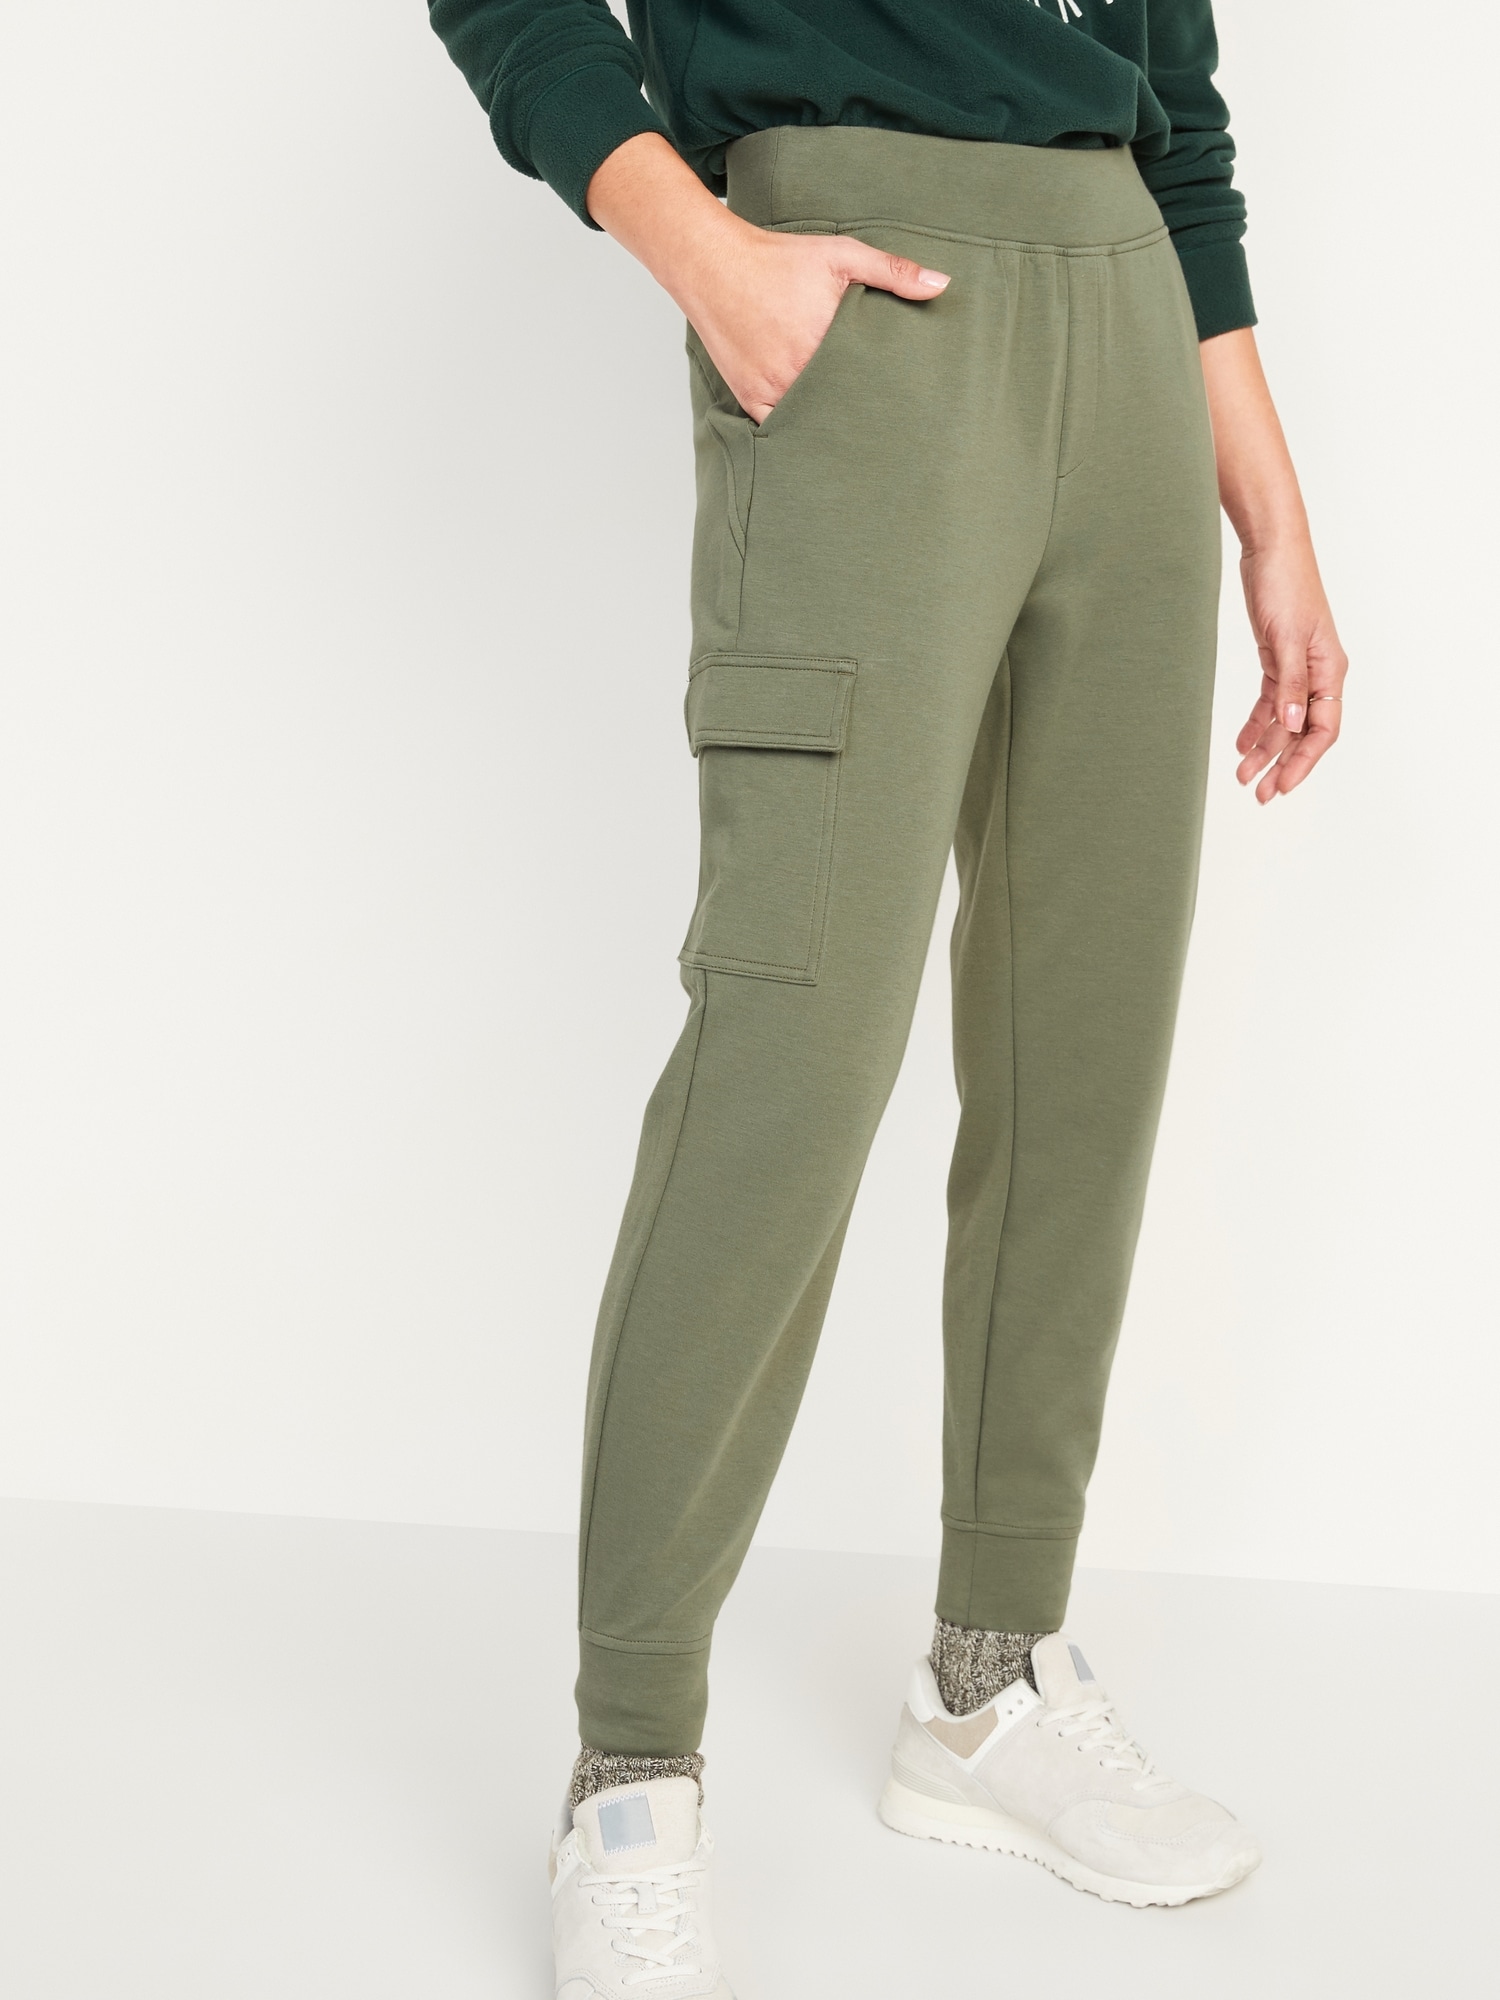 Old Navy High-Waisted Cargo Sweatpants for Women